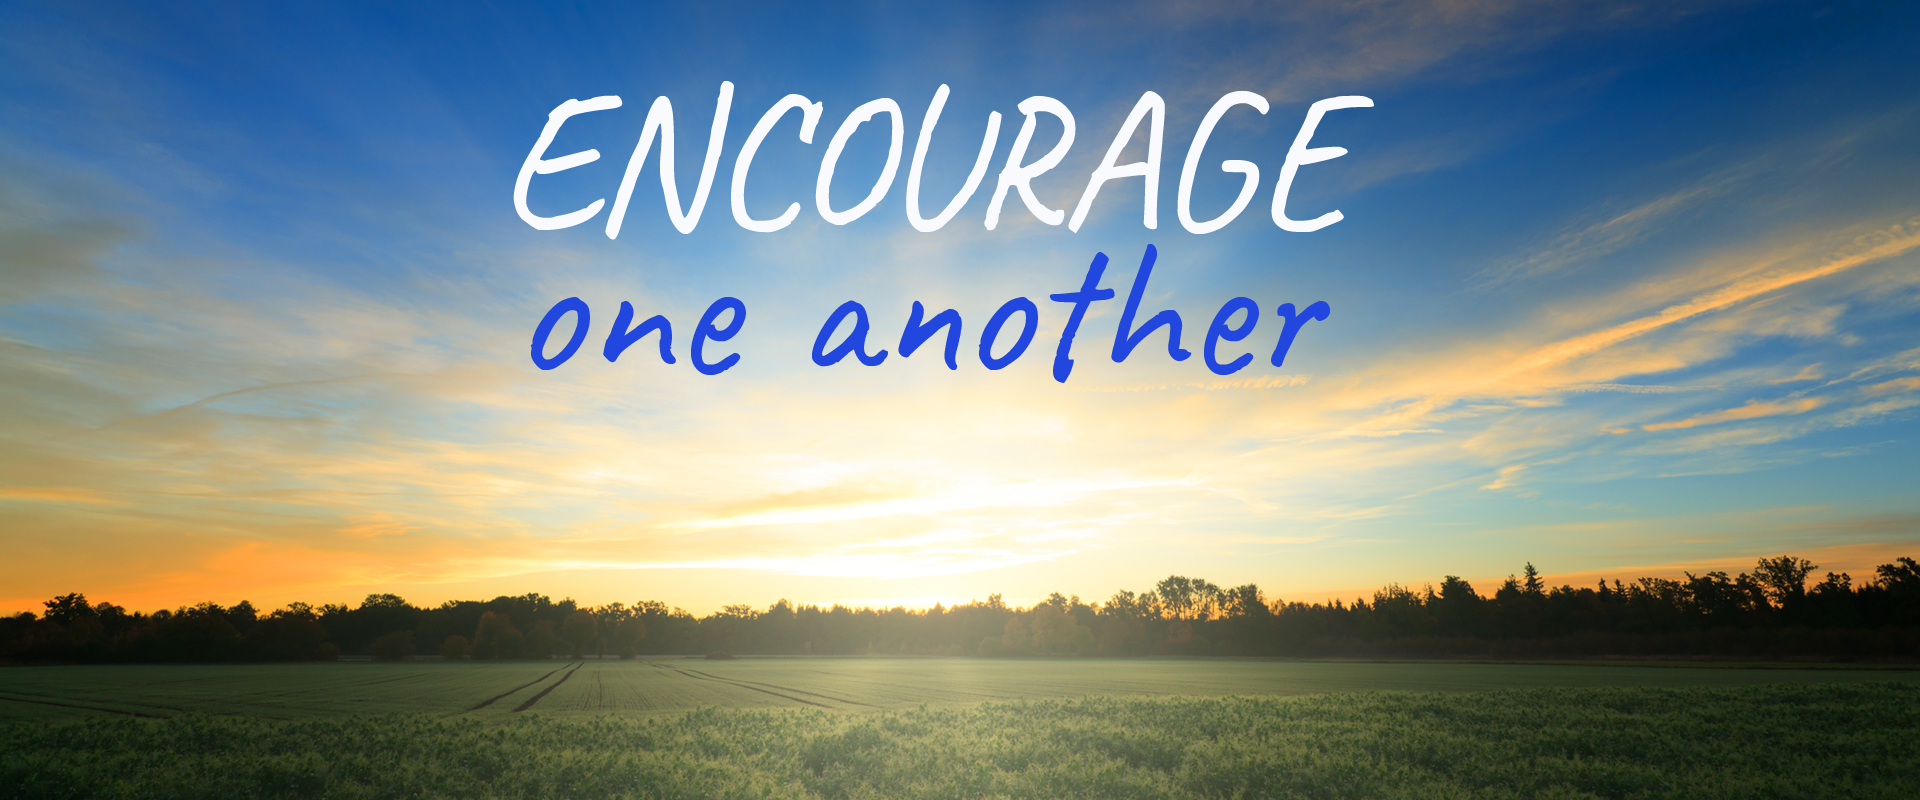 Encourage One Another Daily